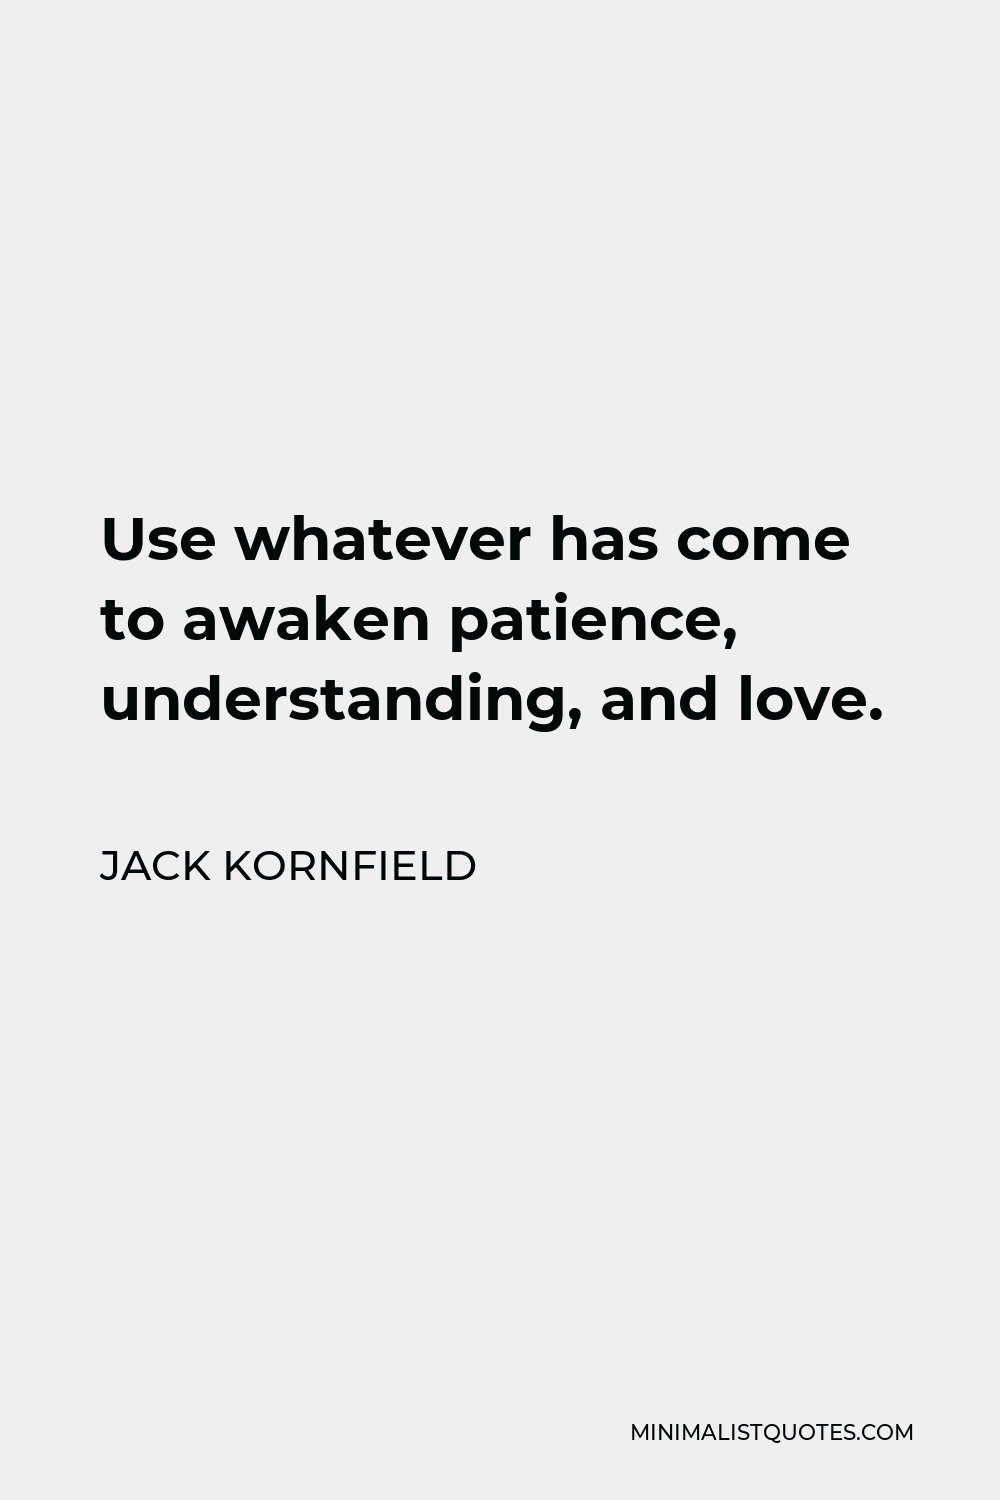 Jack Kornfield Quote - Use whatever has come to awaken patience, understanding, and love.